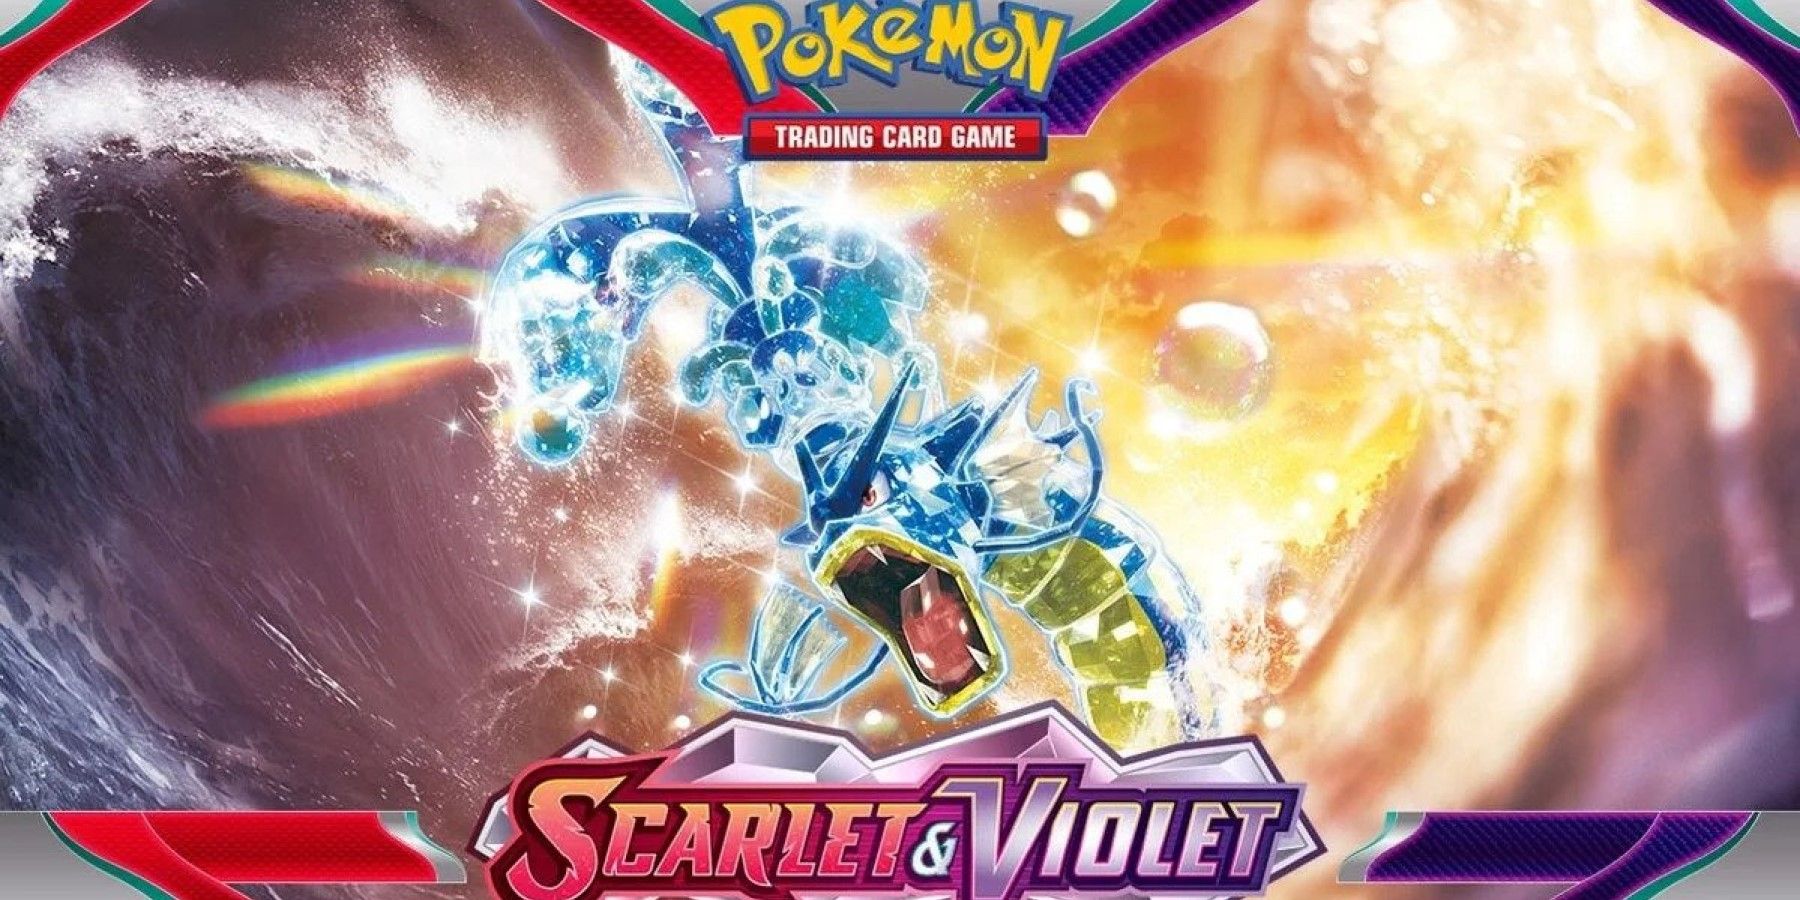 Pokemon TCG: First Pokemon Scarlet and Violet Products Breakdown